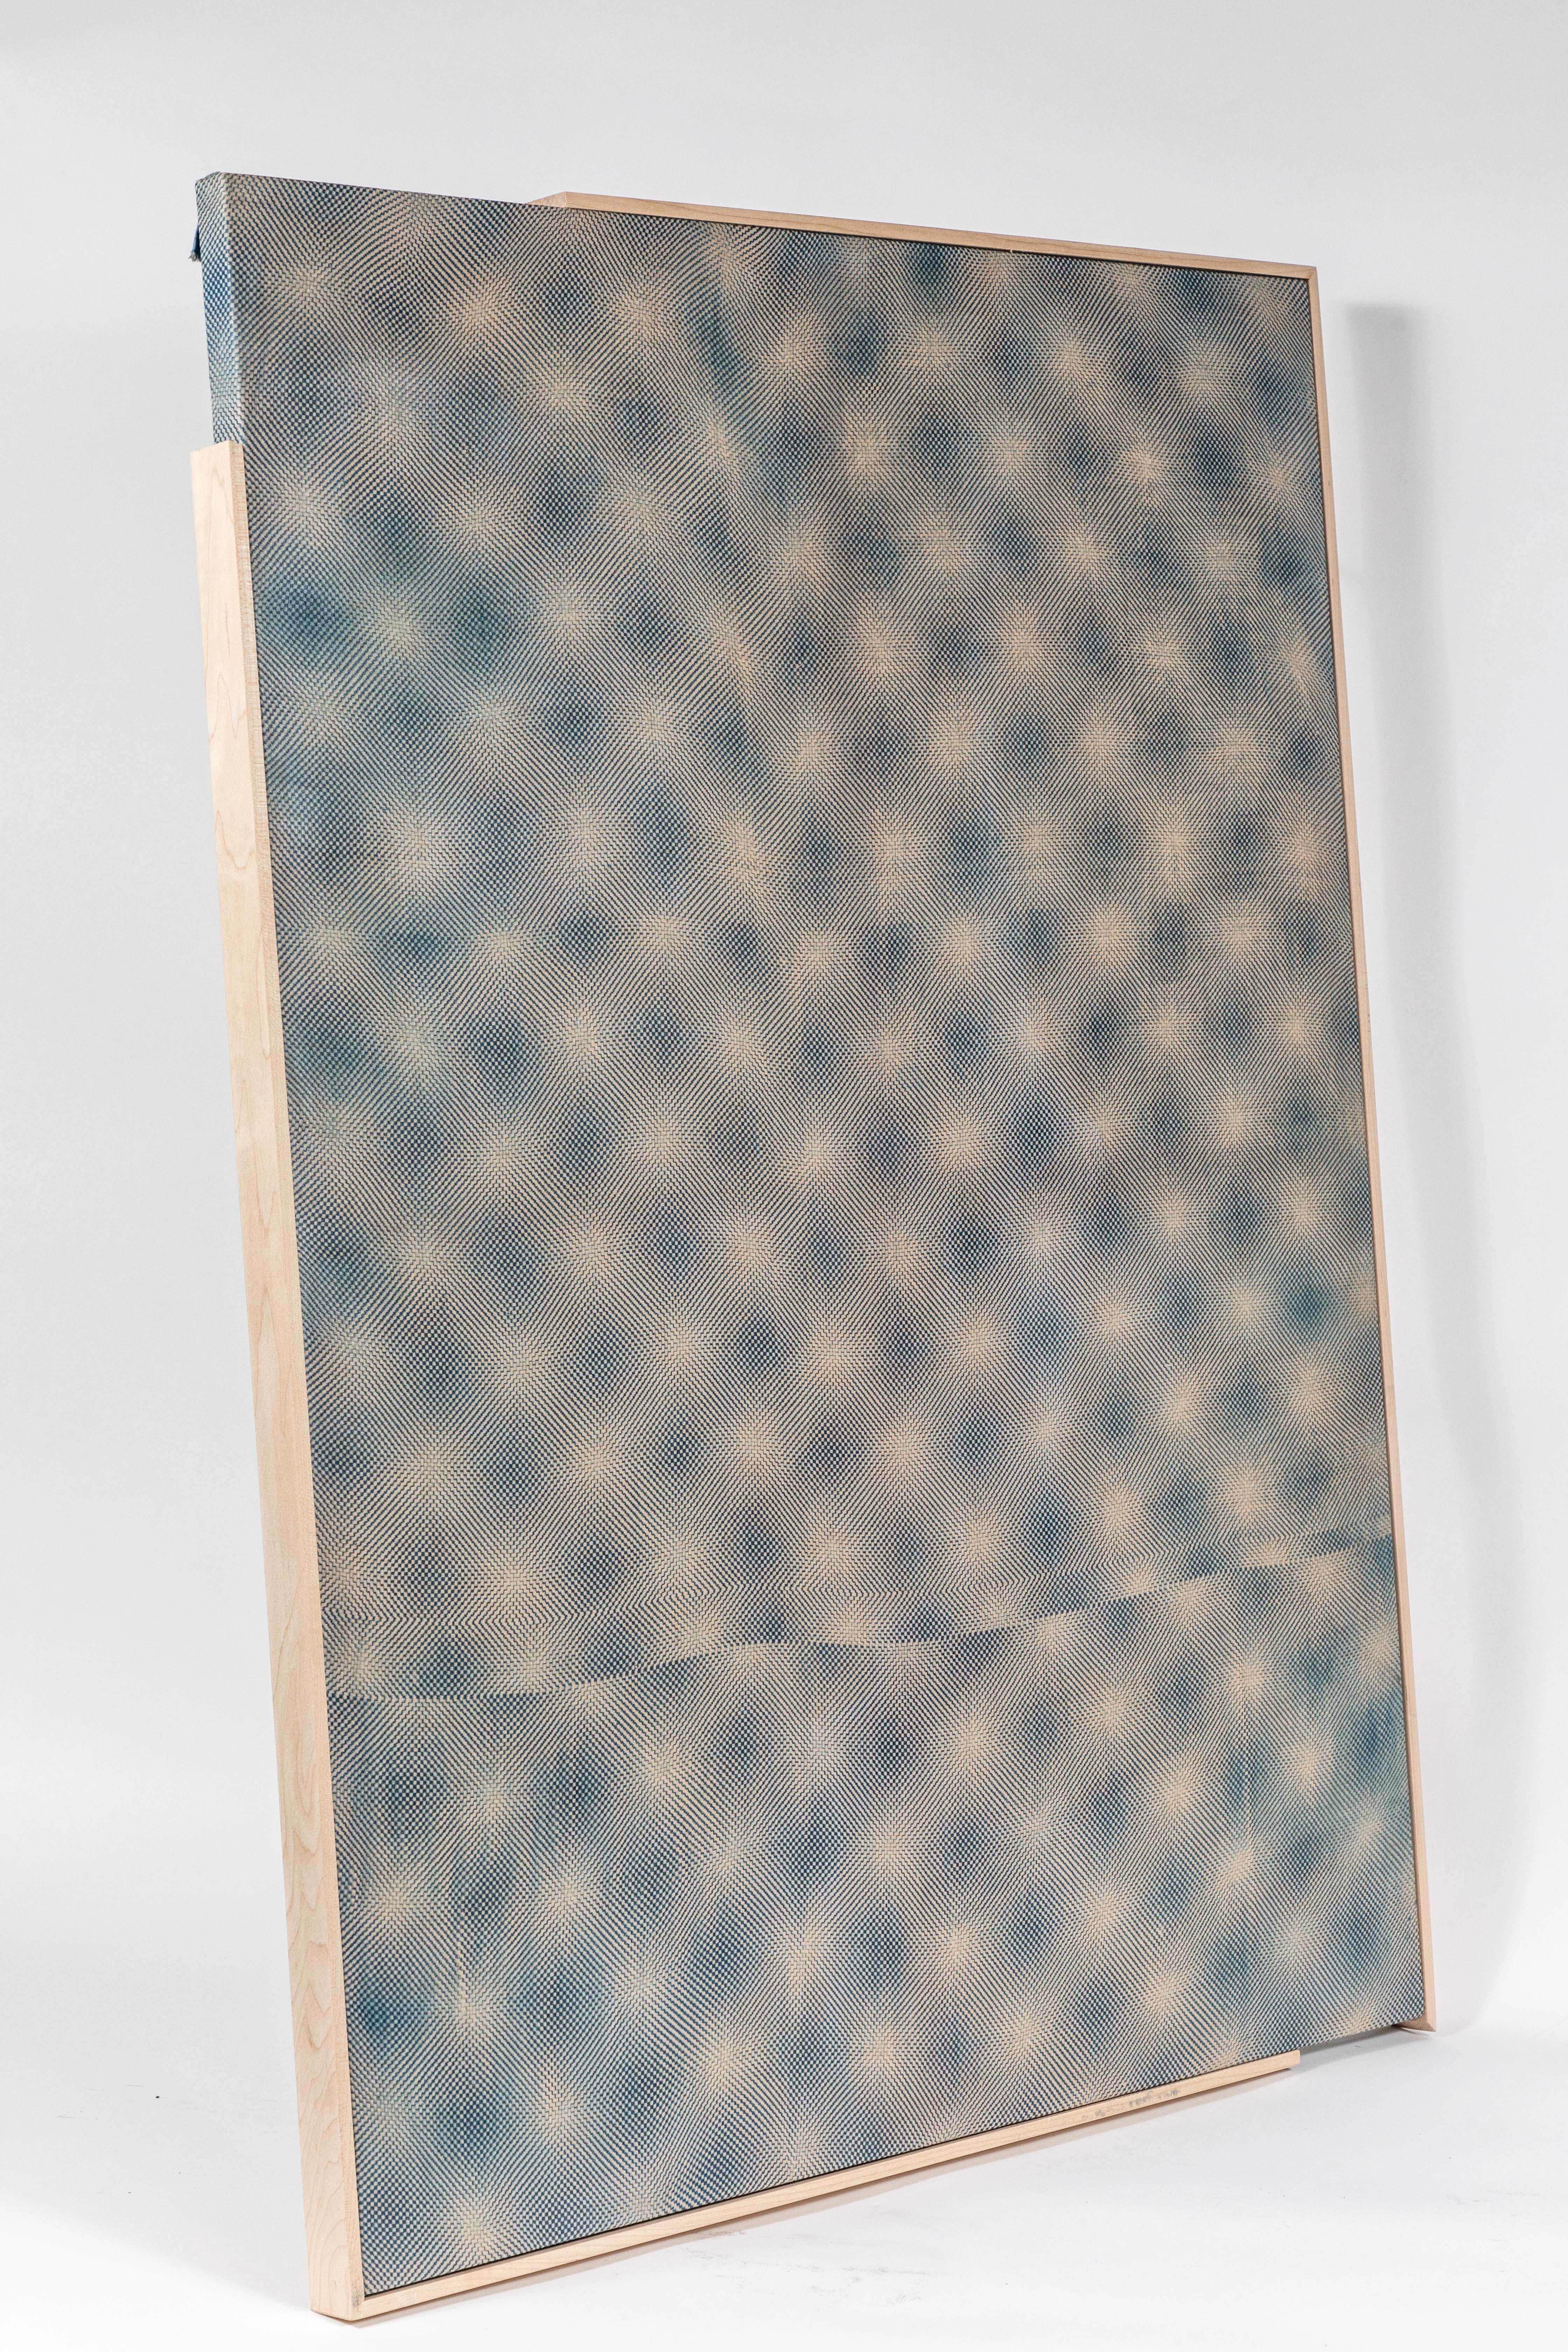 Signed and dated, unique, untitled, 2011, cyanotype-on-linen artwork by internationally exhibited British-born artist, Hugh Scott Douglas (b. 1988). Held in a stylish, purposefully incomplete frame. Selected public collections: S.F. MOMA; Dallas